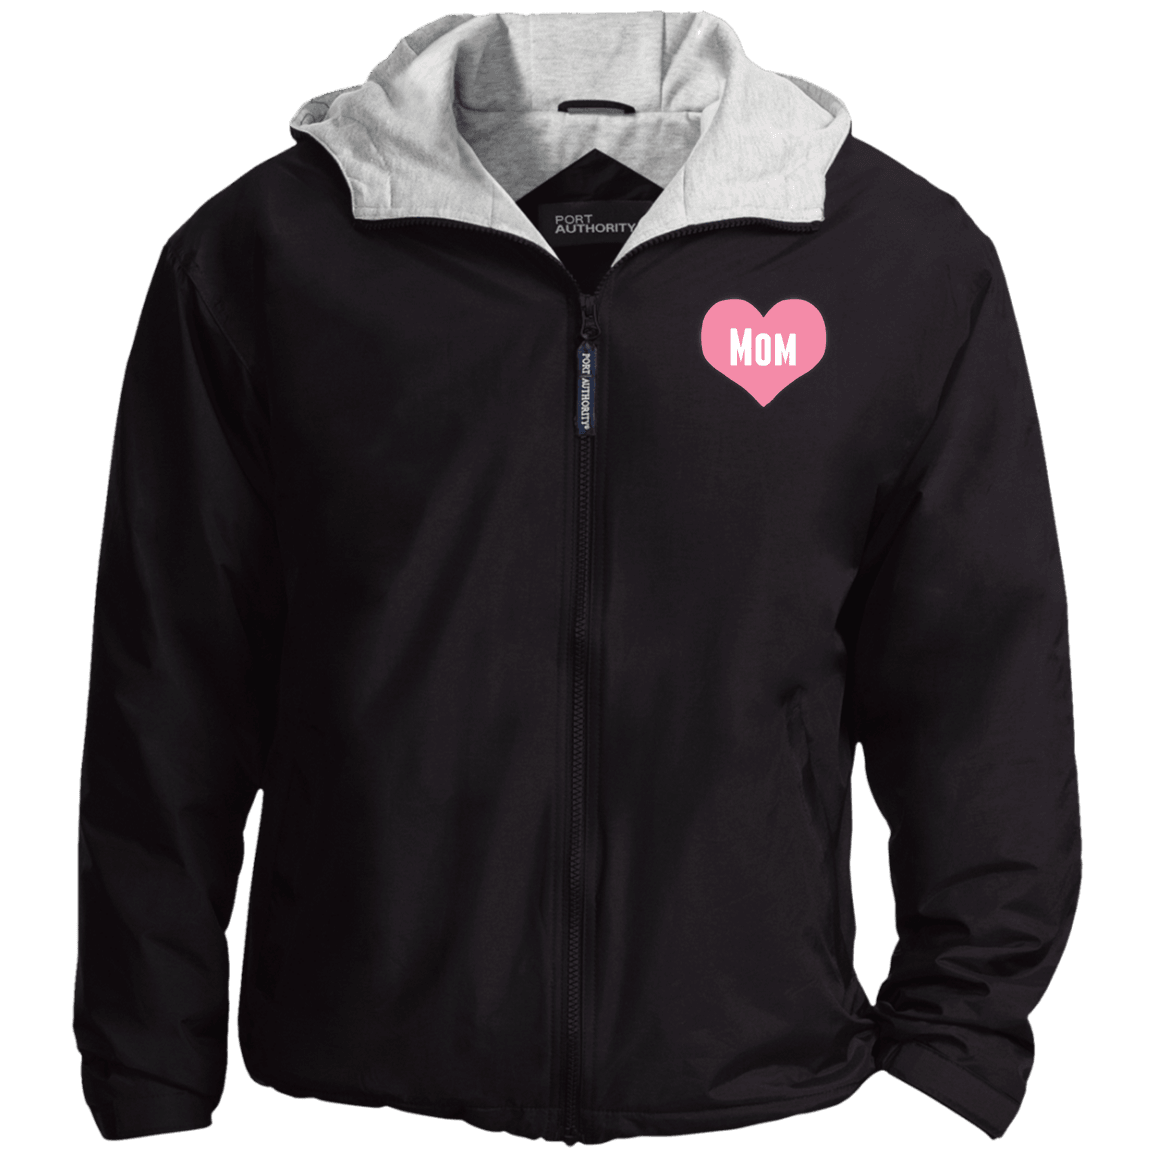 Designs by MyUtopia Shout Out:Mom Heart Pink Embroidered Port Authority Team Jacket,Black/Light Oxford / X-Small,Jackets